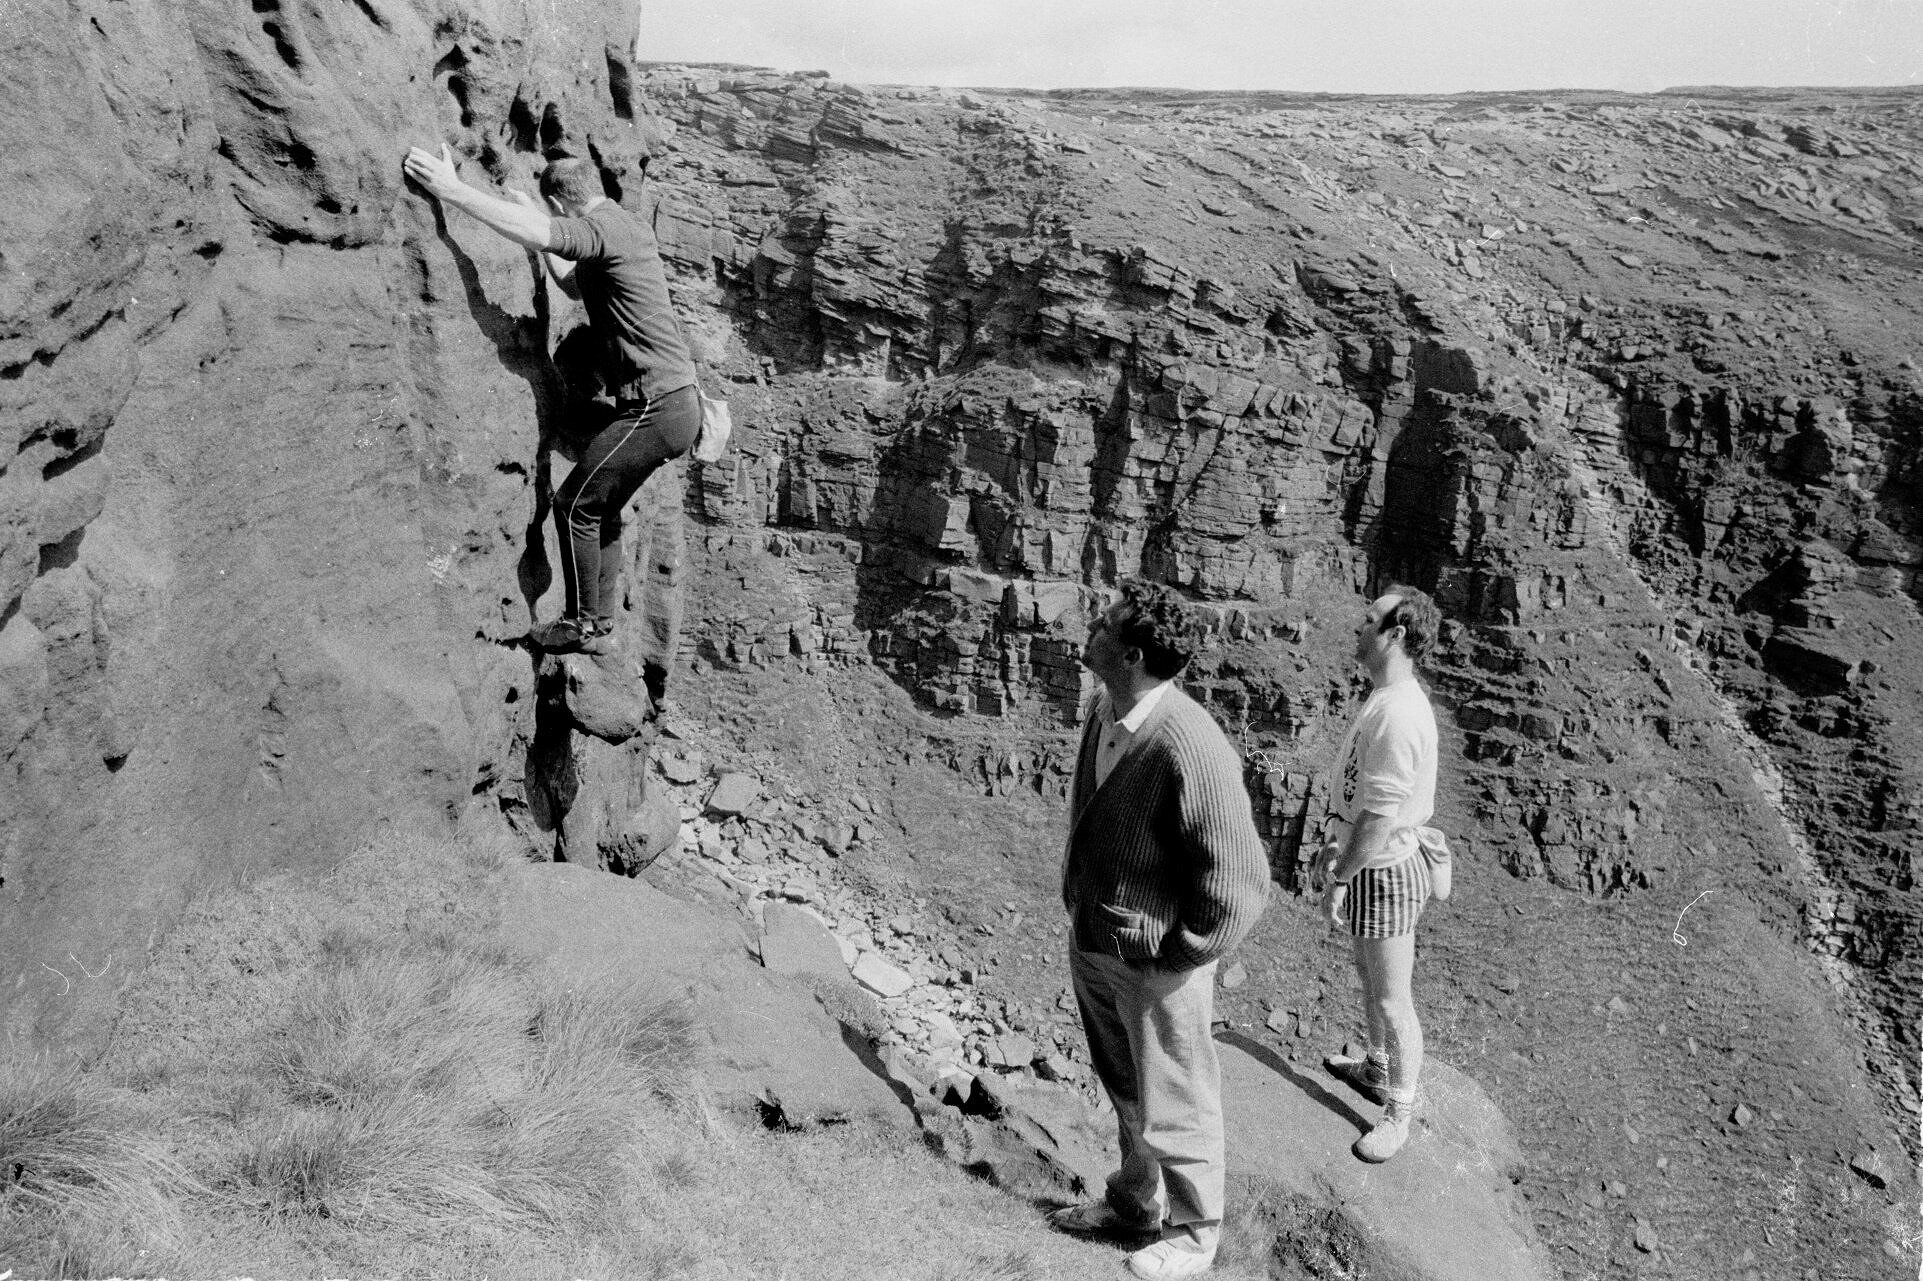 John climbing at Kinder Downfall in 1989 with his brother Rob, Graham Hoey and his brother Alan Hoey (who took the photo).   © Alan Hoey